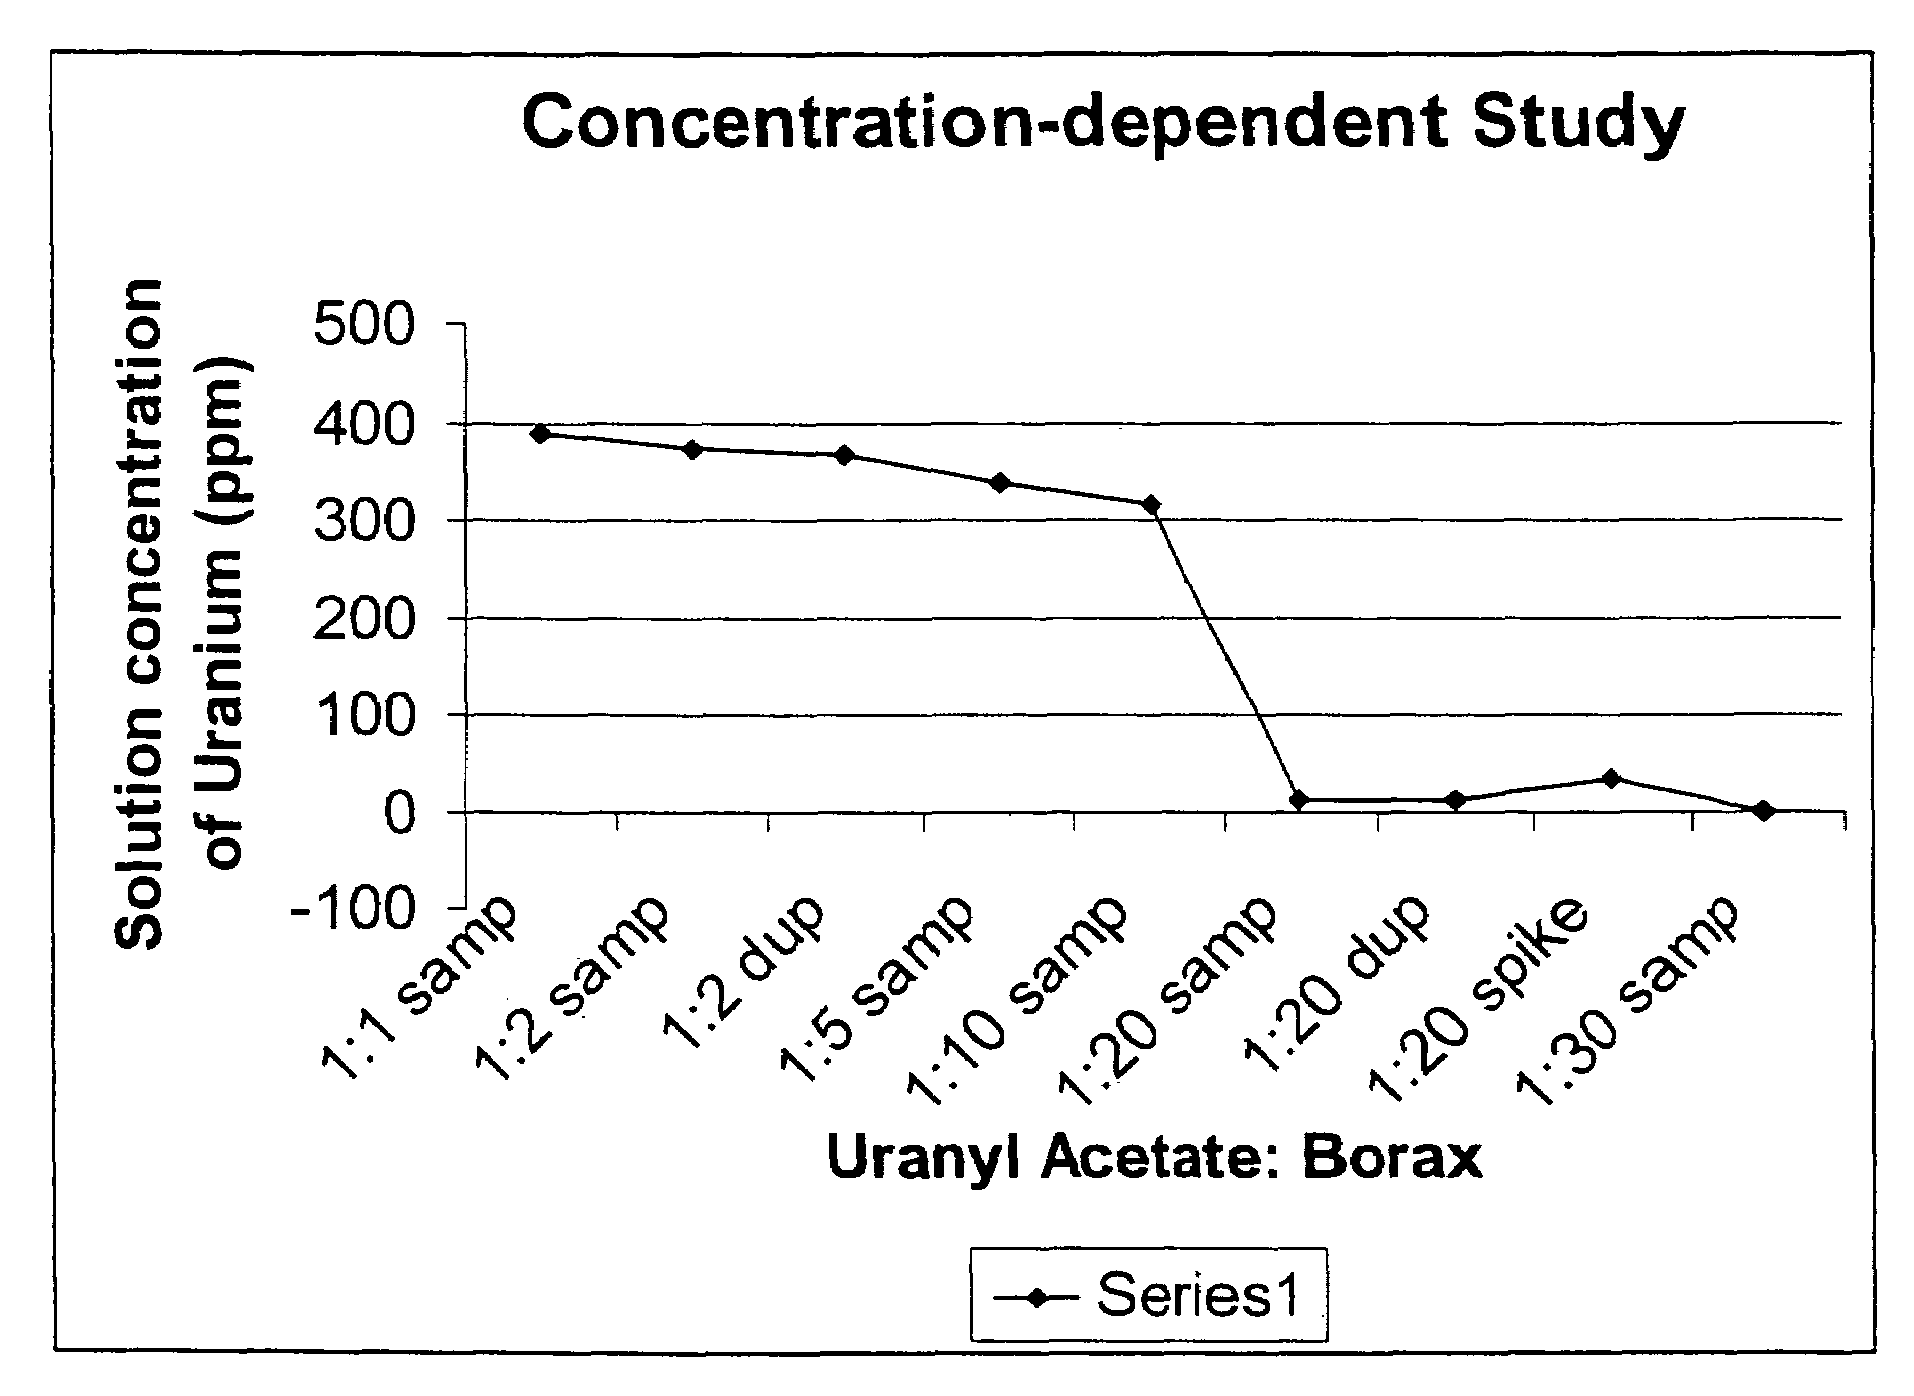 Use of boron compounds to precipitate uranium from water